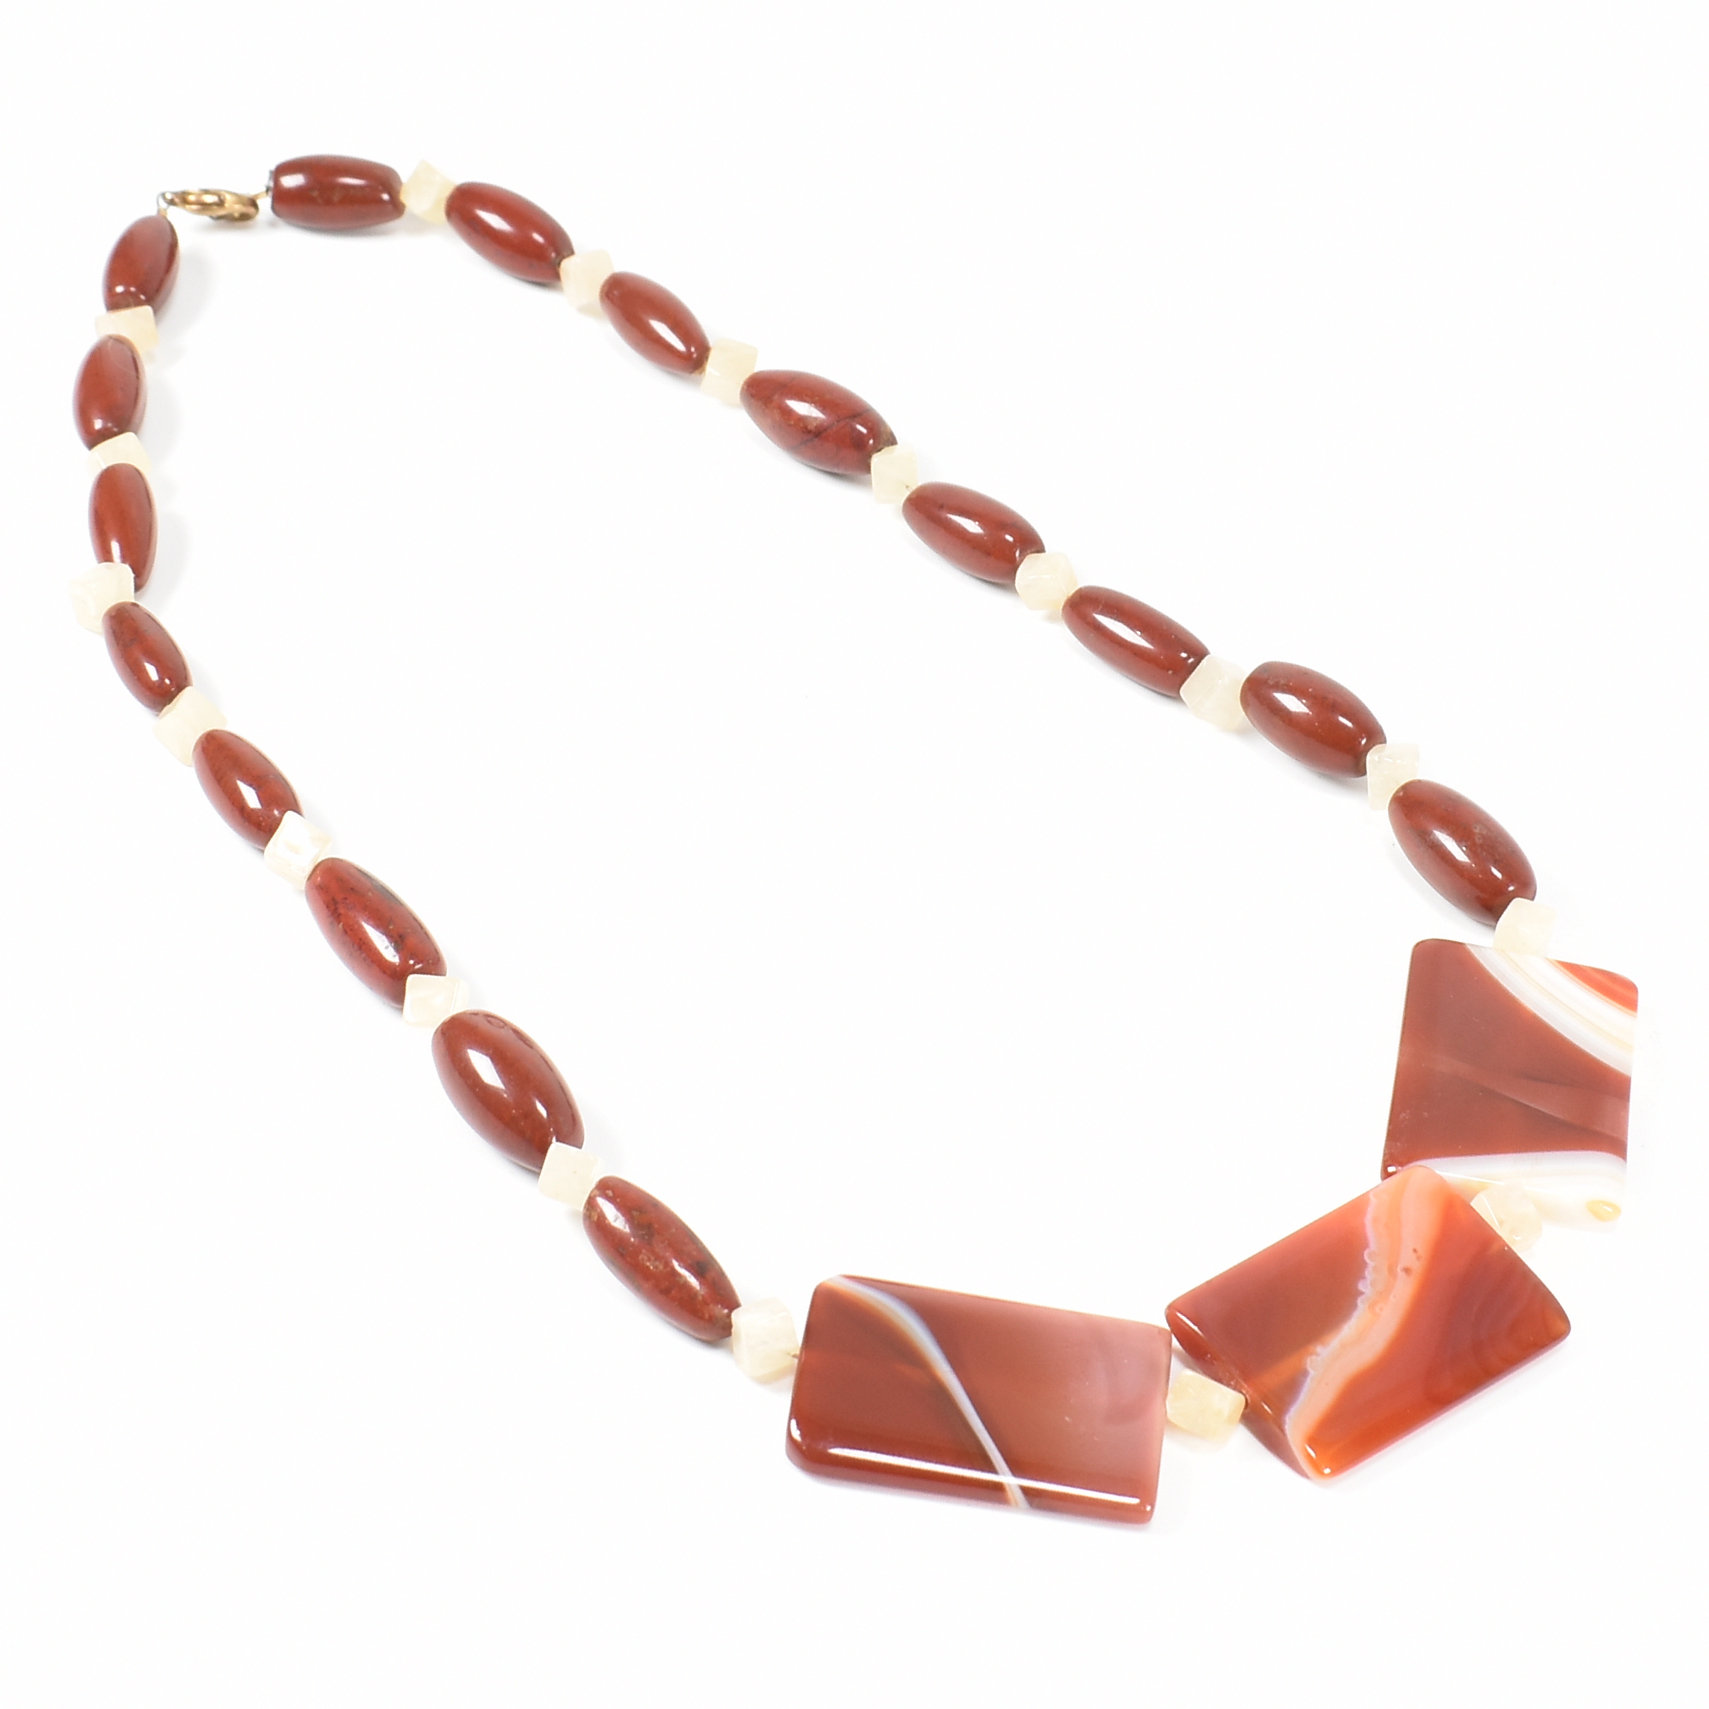 MID CENTURY CARNELIAN BANDED AGATE NECKLACE - Image 4 of 6